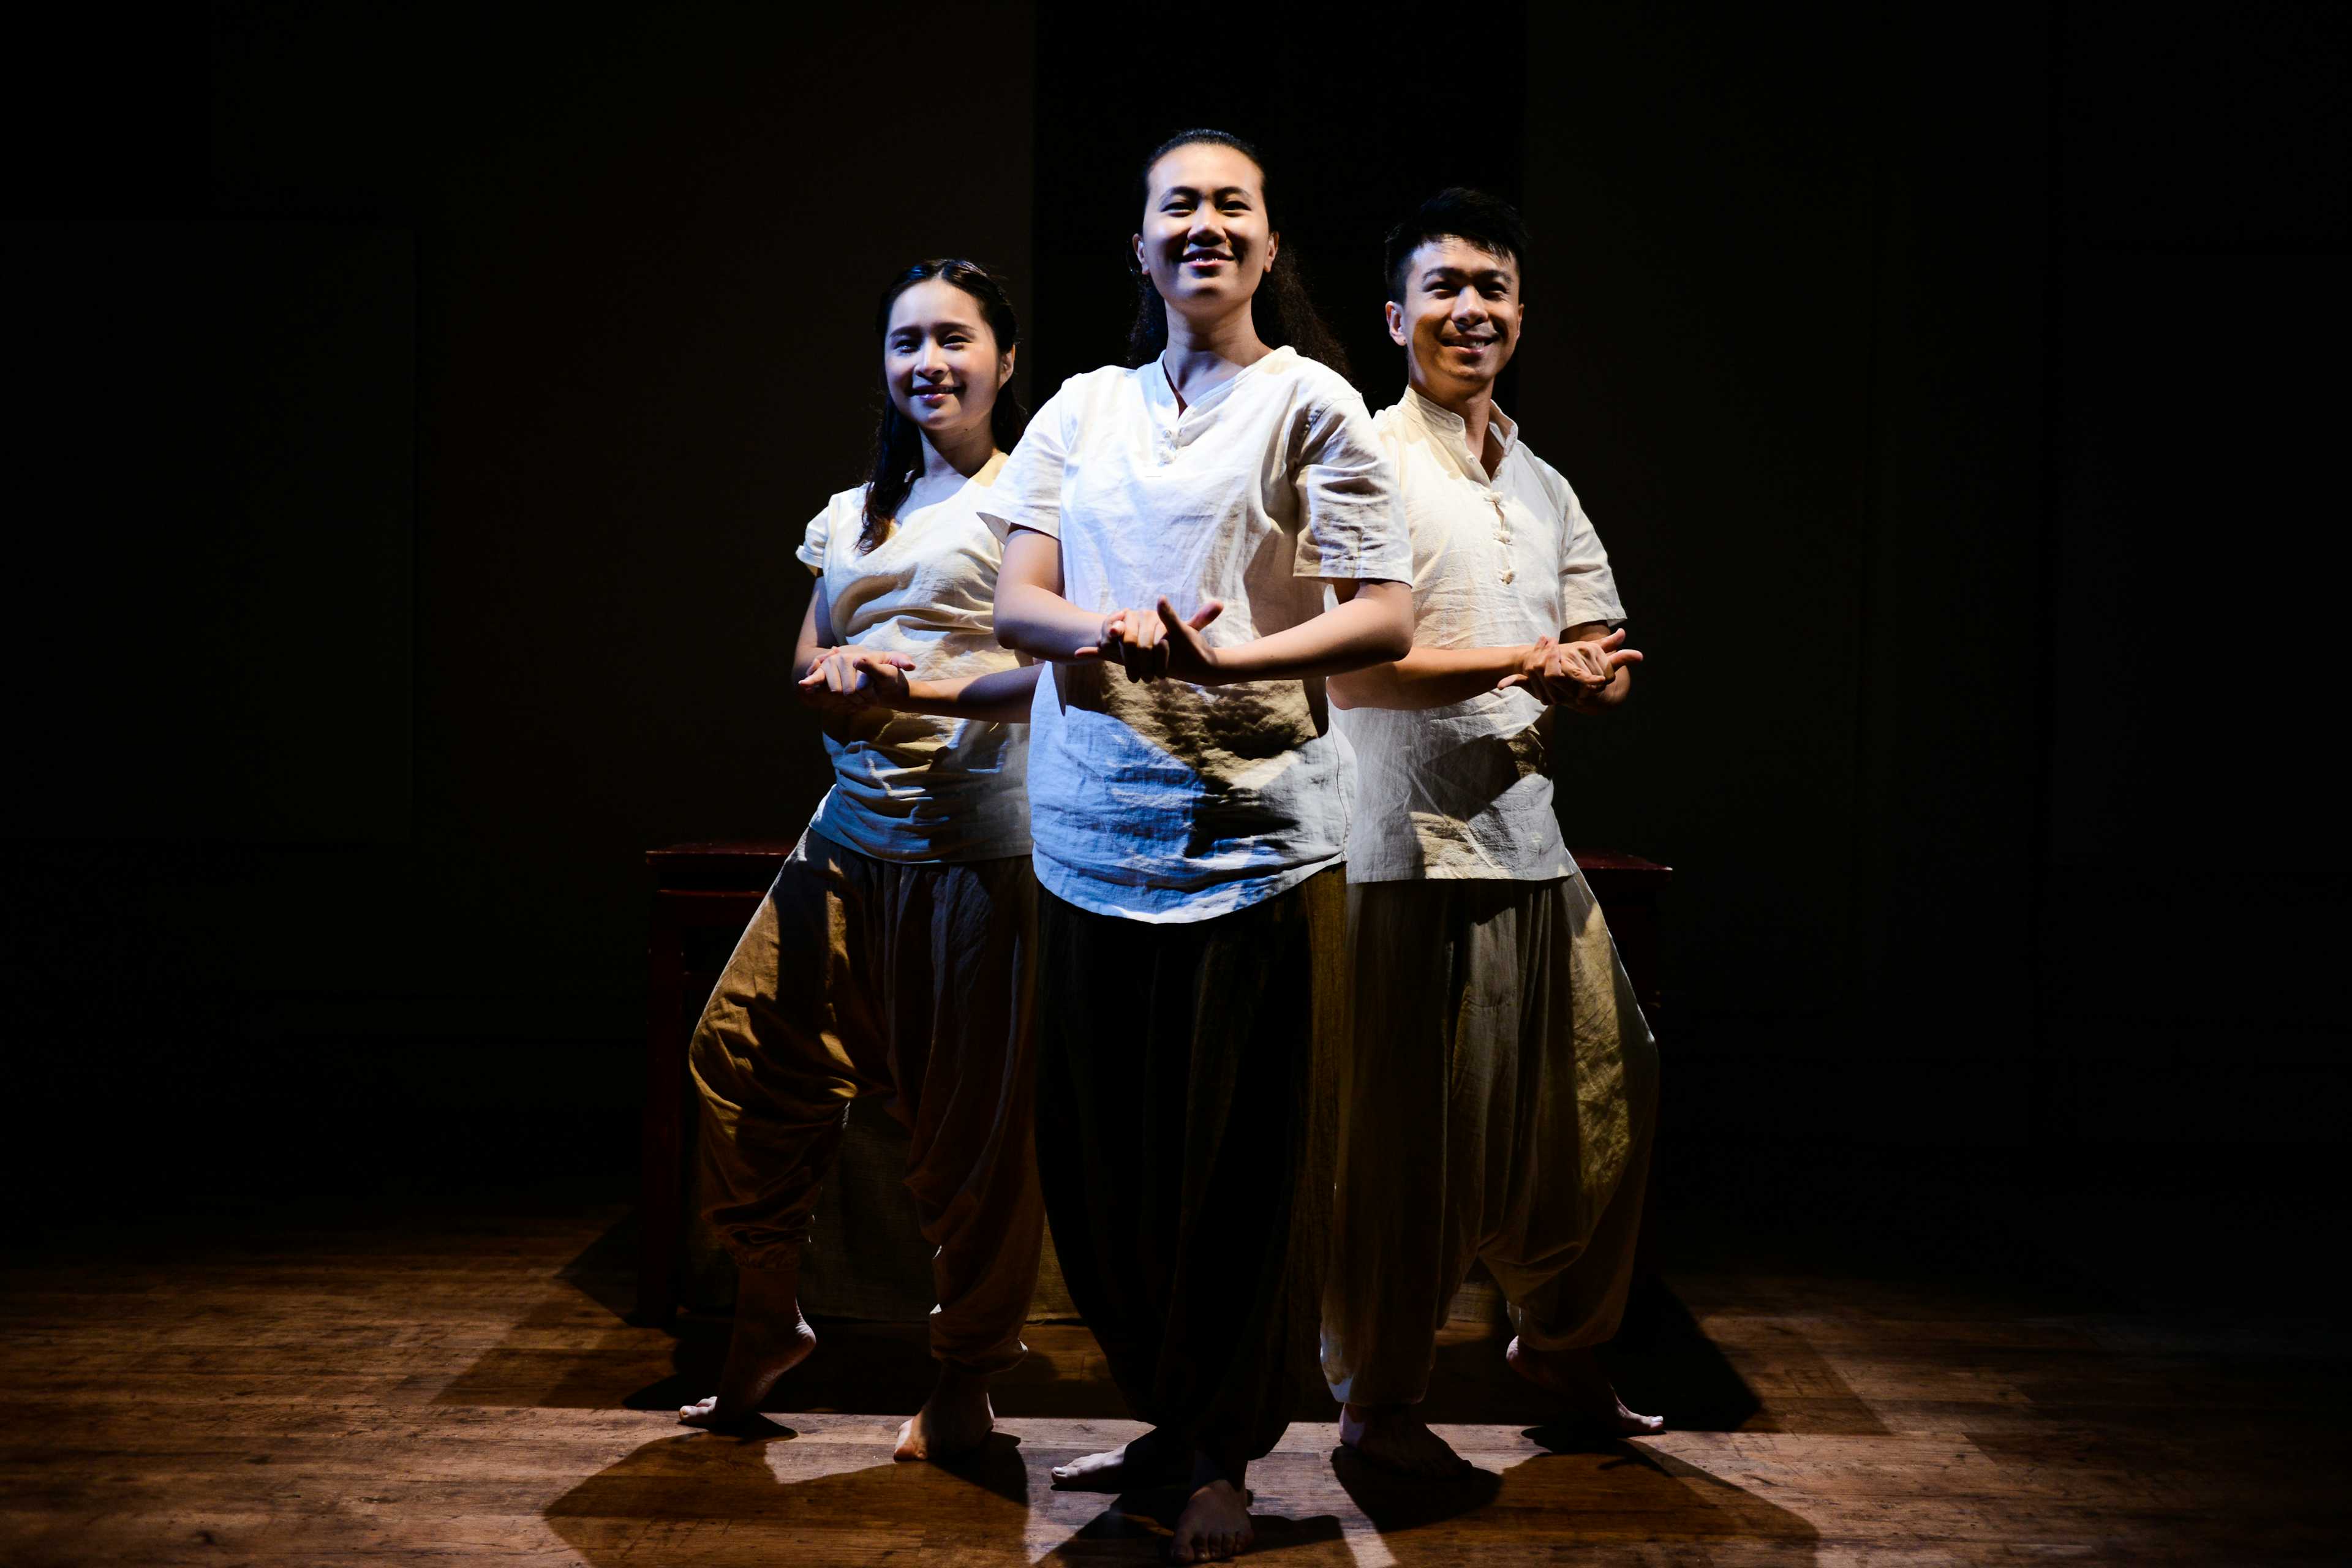 Milk and Honey | Featuring: Billy Sy, Lung Jes, Michelle Li | Tagged as: Milk and Honey, Show | Photo: Fung Wai Sun |  (Rooftop Productions • Hong Kong Theatre Company)  | Rooftop Productions • Hong Kong Theatre Company